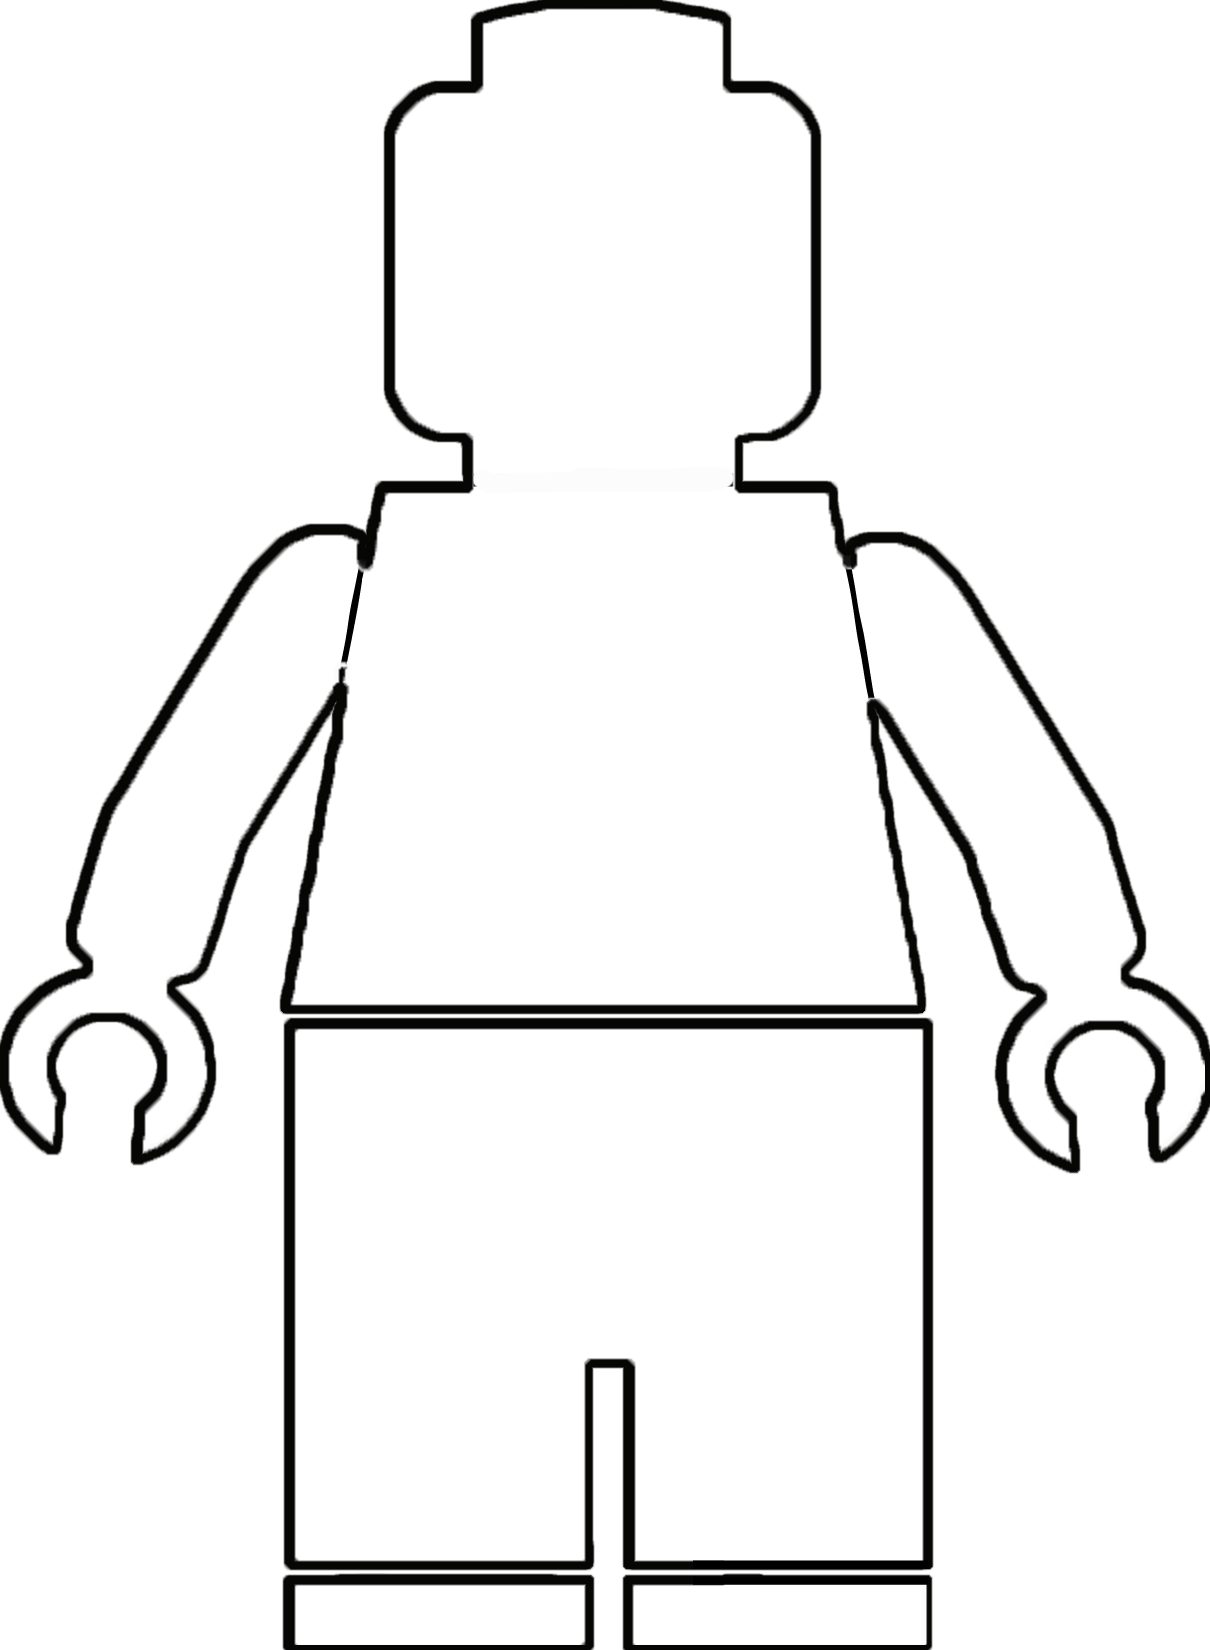 Lego-man - Lego Man Cake Template (1210x1650), Png Download.